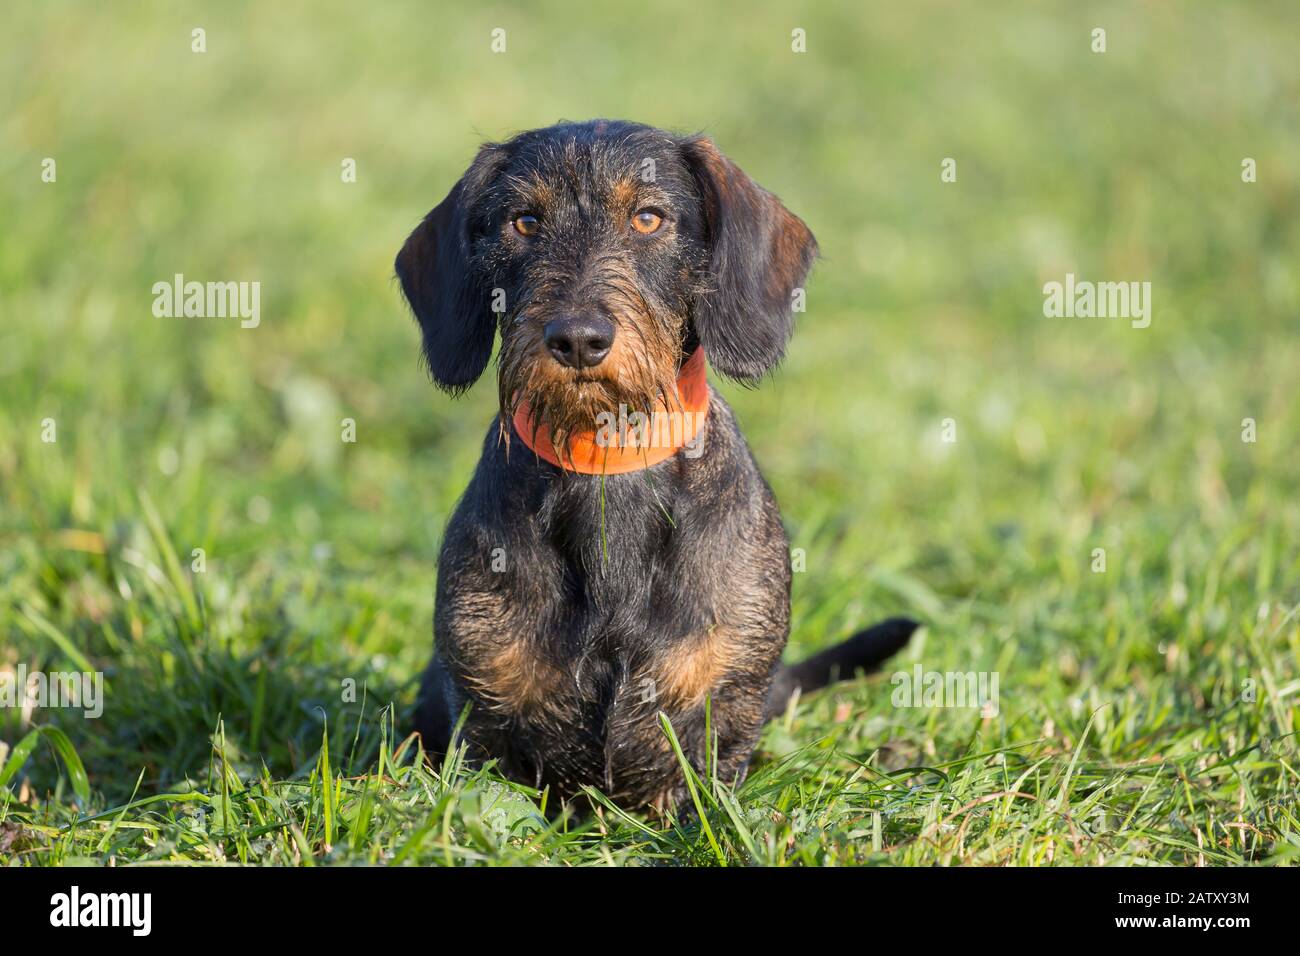 Wire-haired dachshund / wirehaired dachshund, short-legged, long-bodied, hound-type dog breed on the lawn in garden Stock Photo